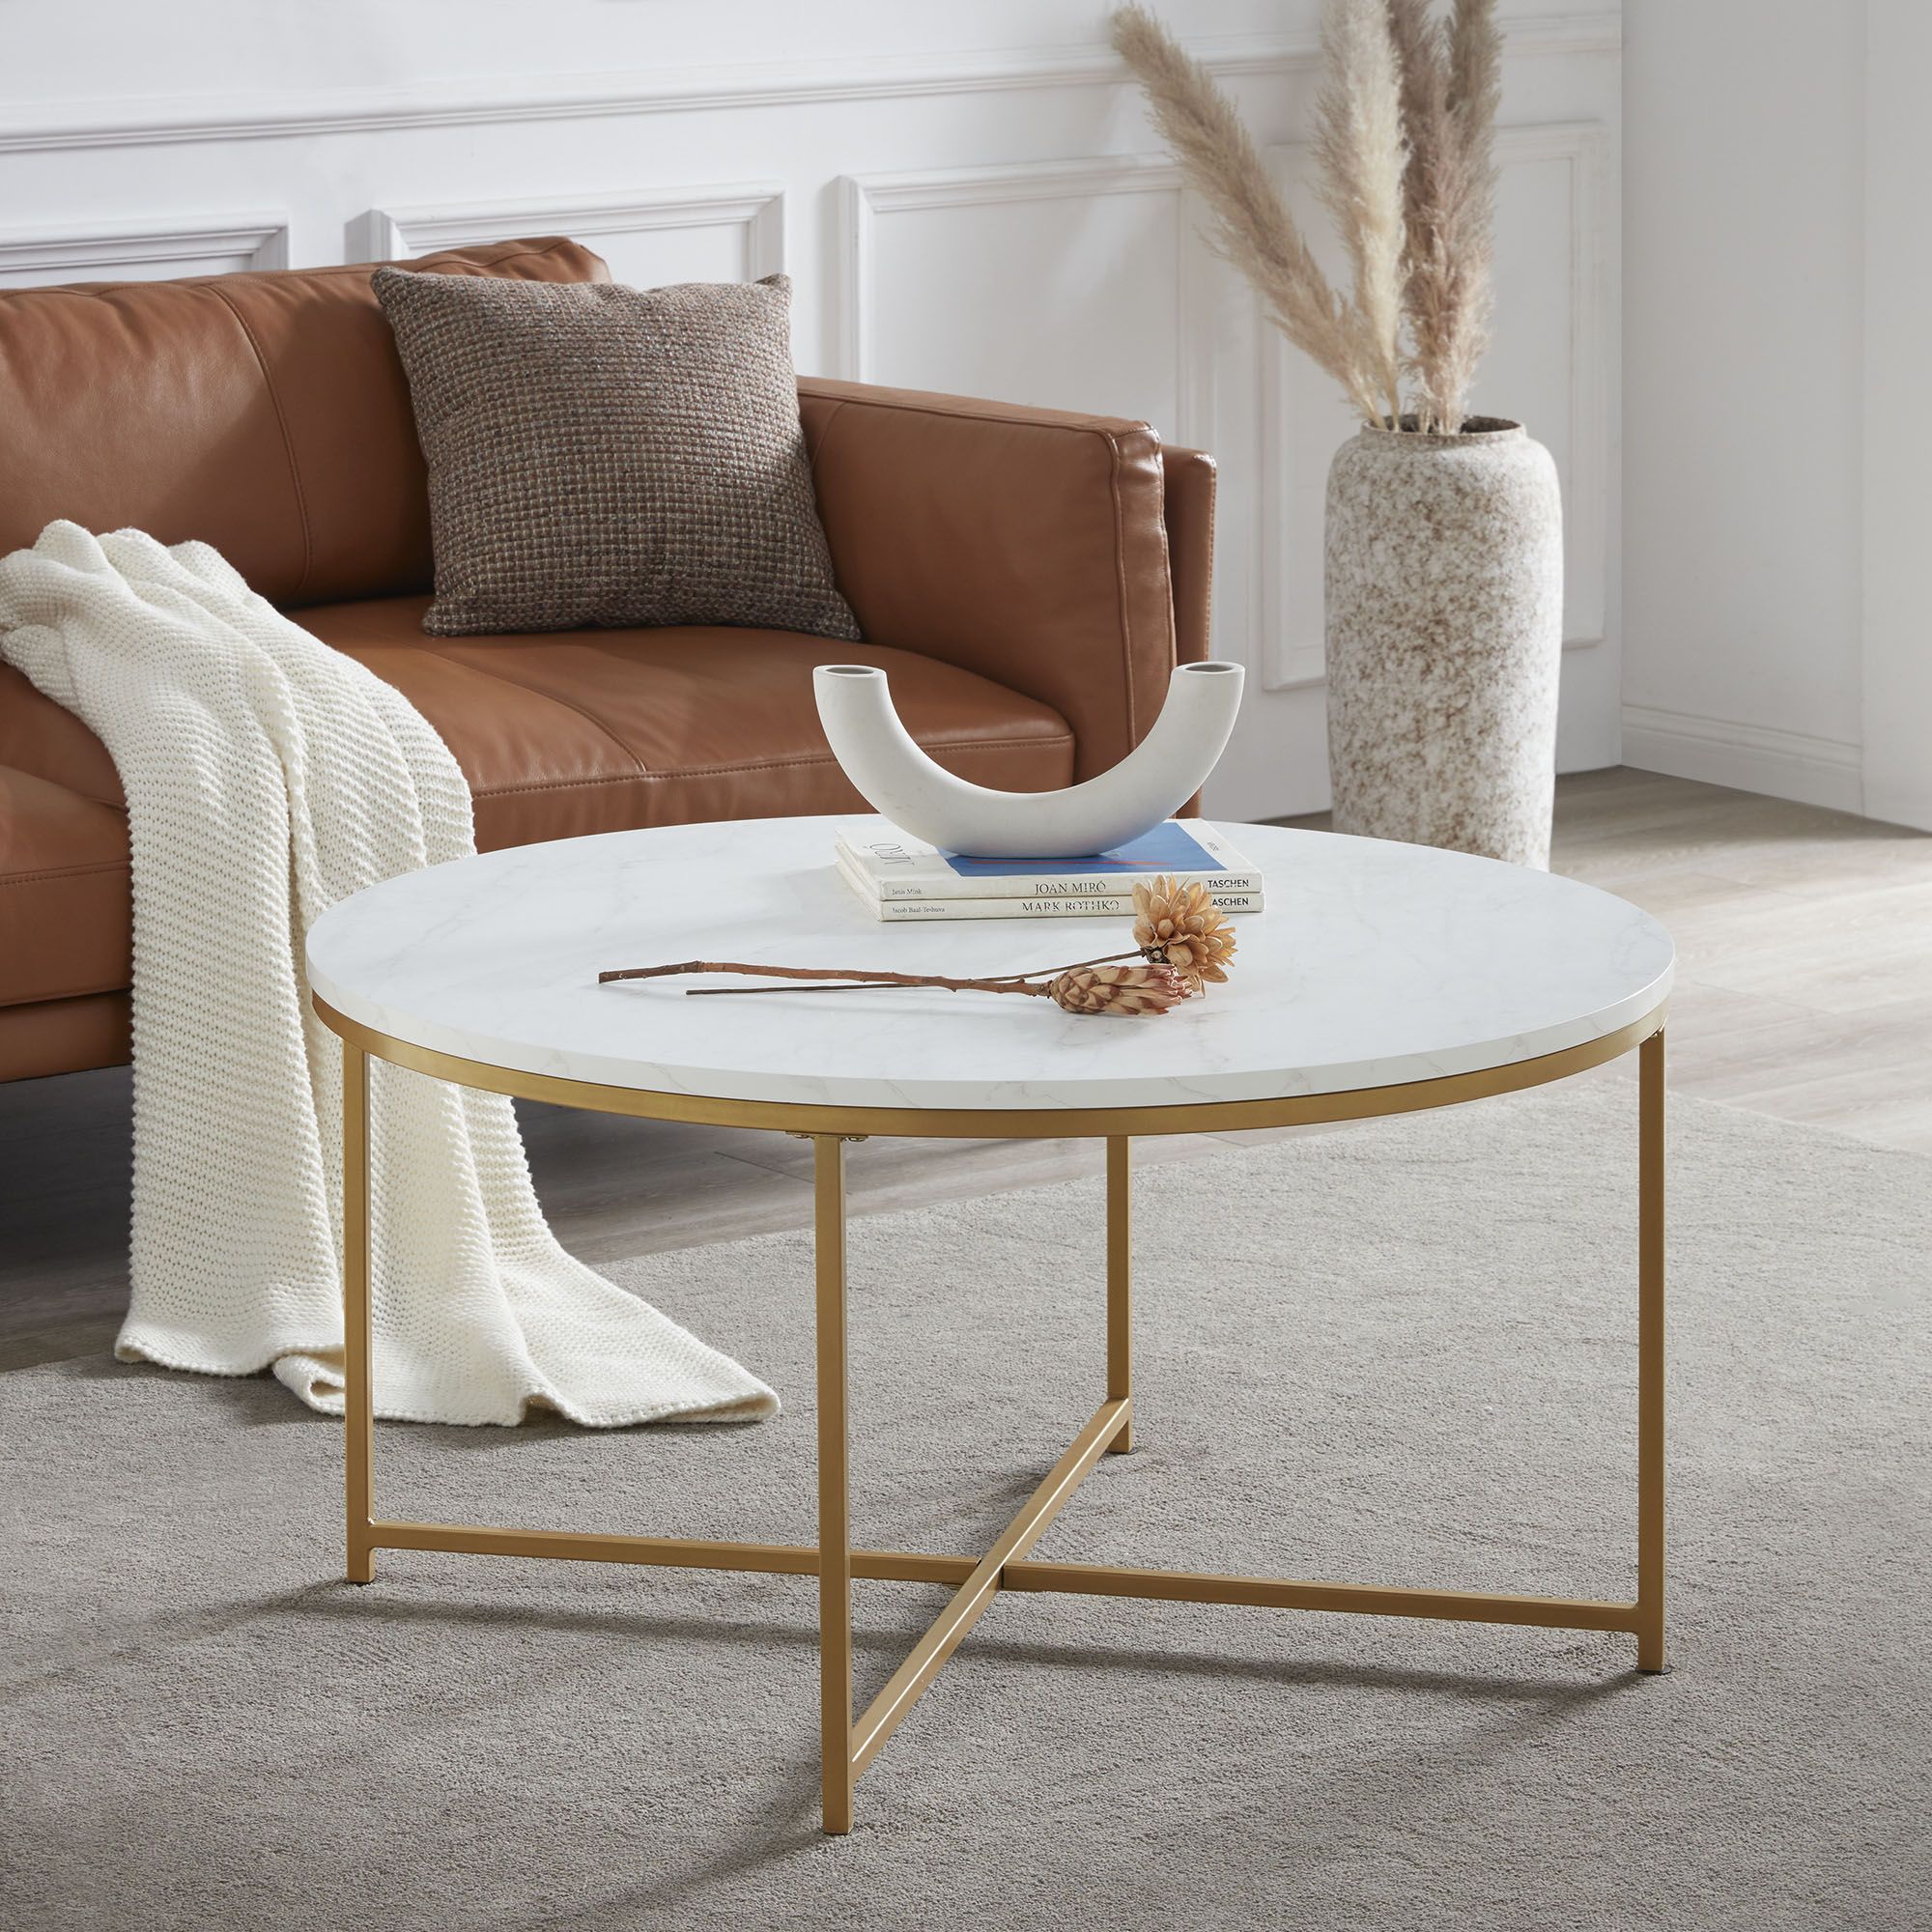 Modern Round Coffee Table Accent Table Home Decor Living Room, Marble/gold  | Ebay For Modern Round Faux Marble Coffee Tables (View 15 of 15)